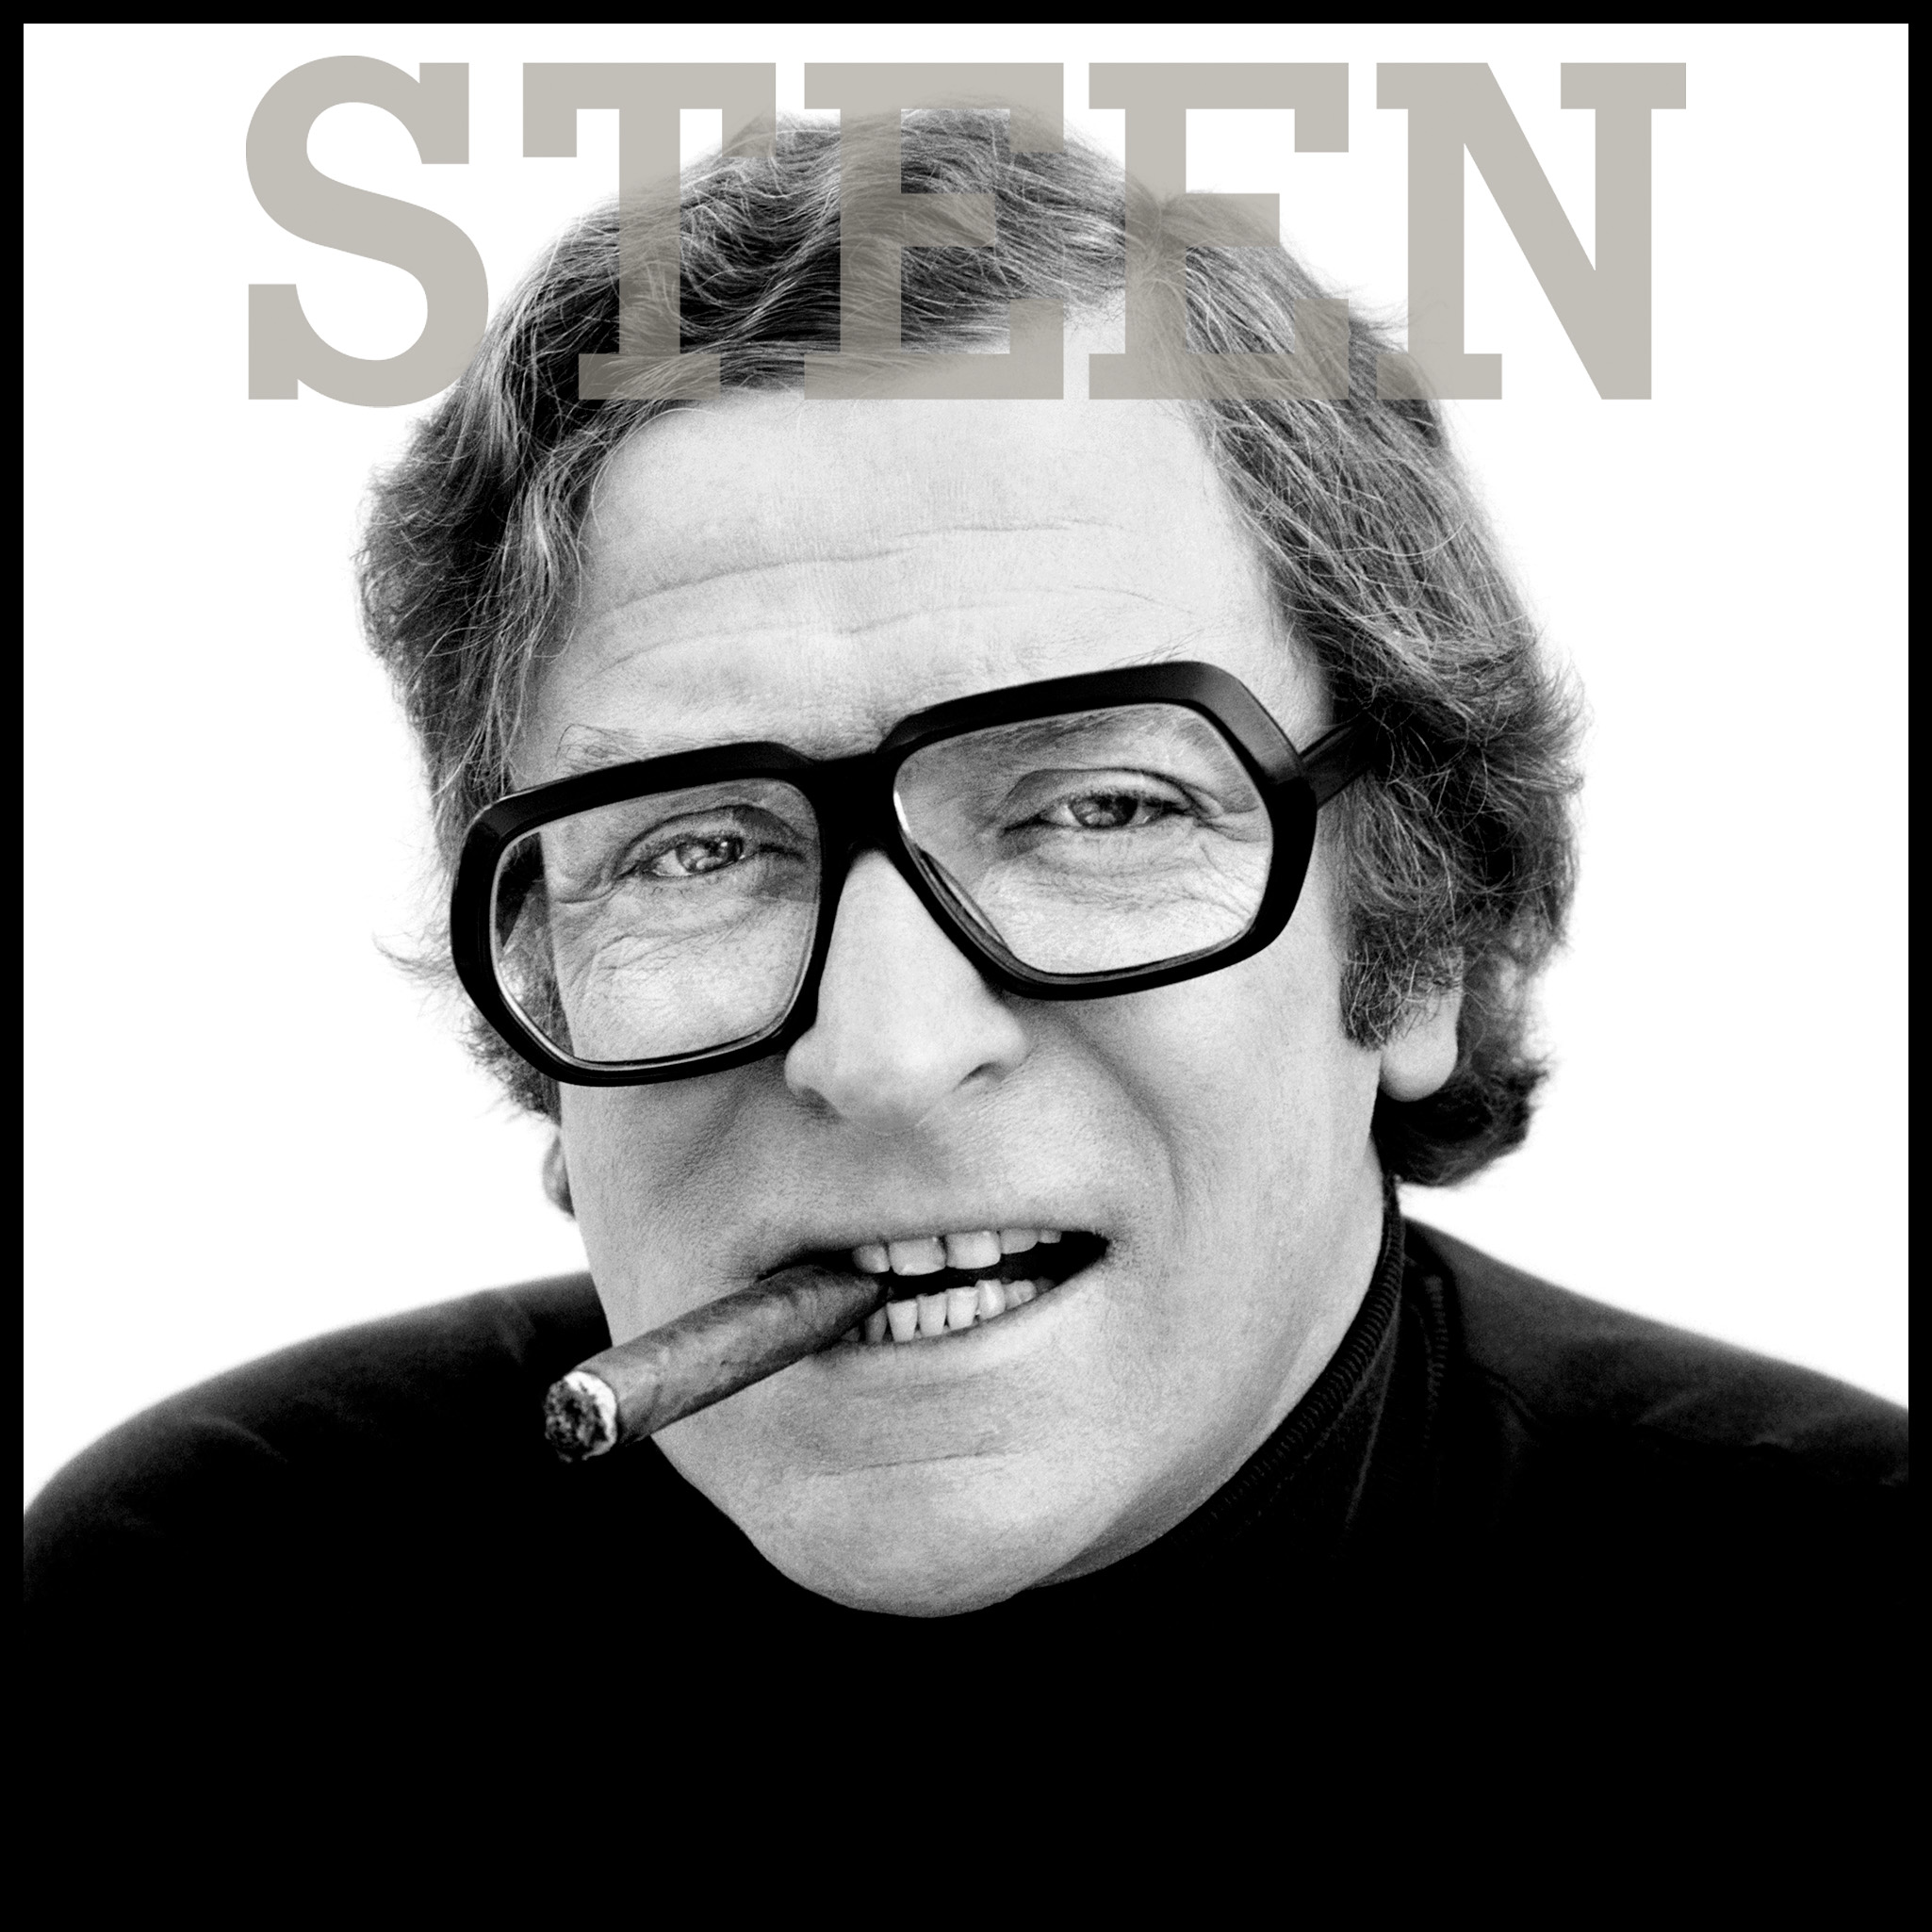 an exclusive portrait photograph of british actor michael caine with a cigar by photographer david steen